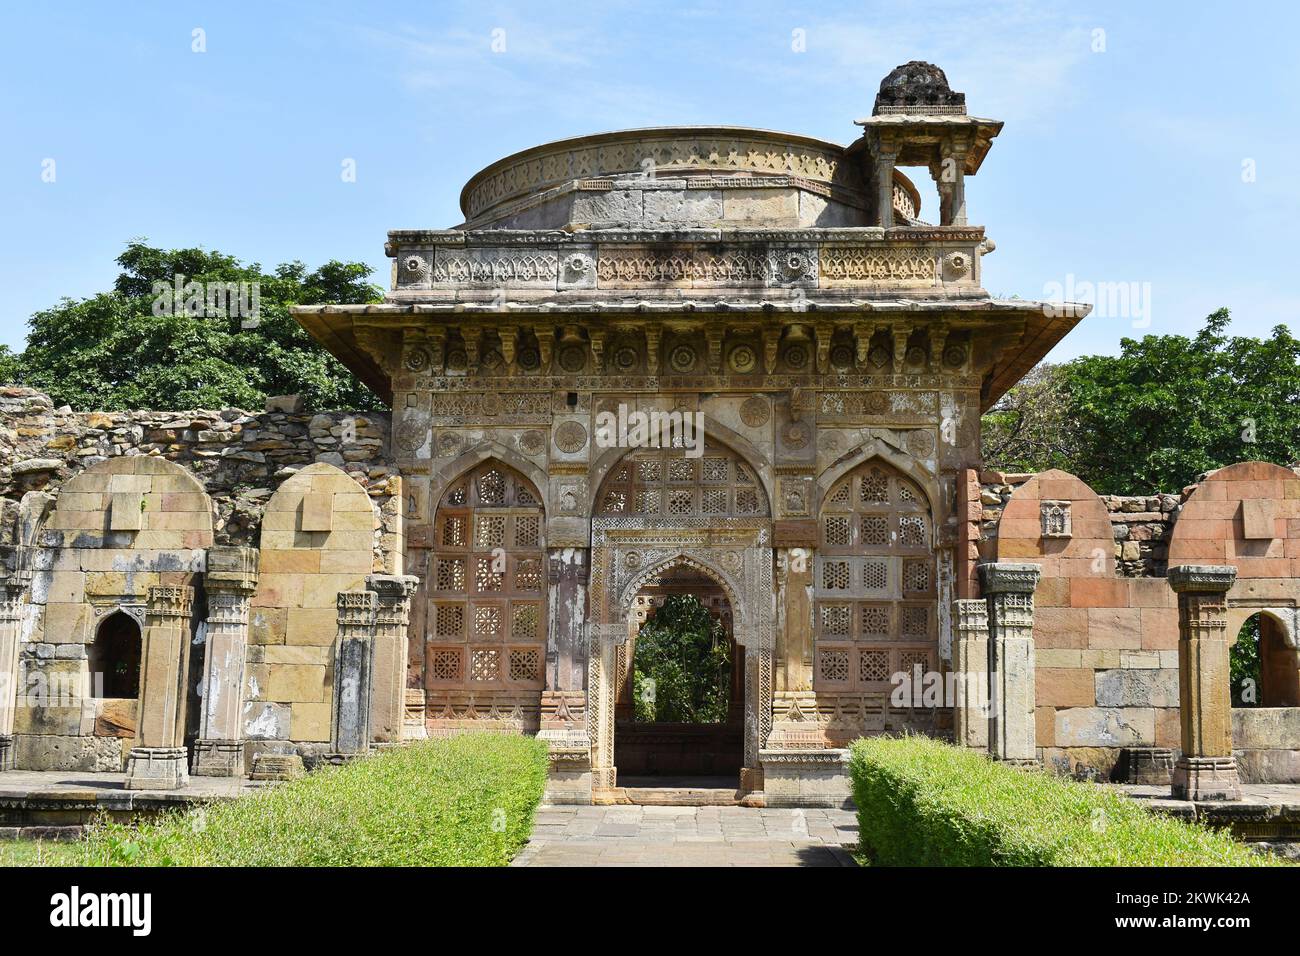 Jami Masjid, Architectural Archway and courtyard with intricate stone carvings, an Islamic monuments was built by Sultan Mahmud Begada in 1509, Champa Stock Photo